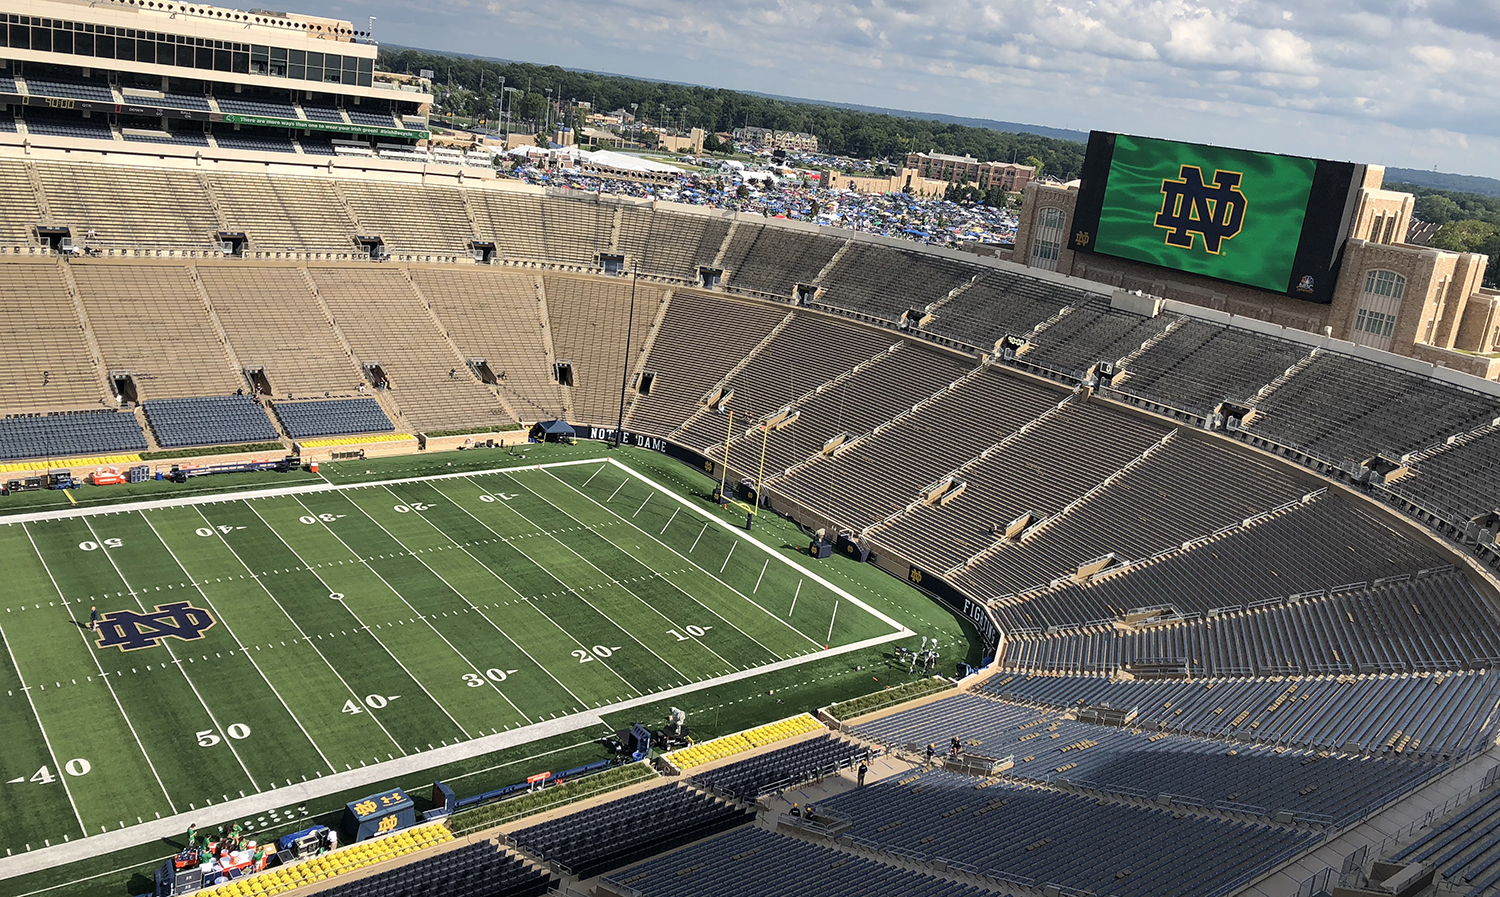 NBC Sports Delivers 4K HDR Coverage of Notre Dame Football Home Games